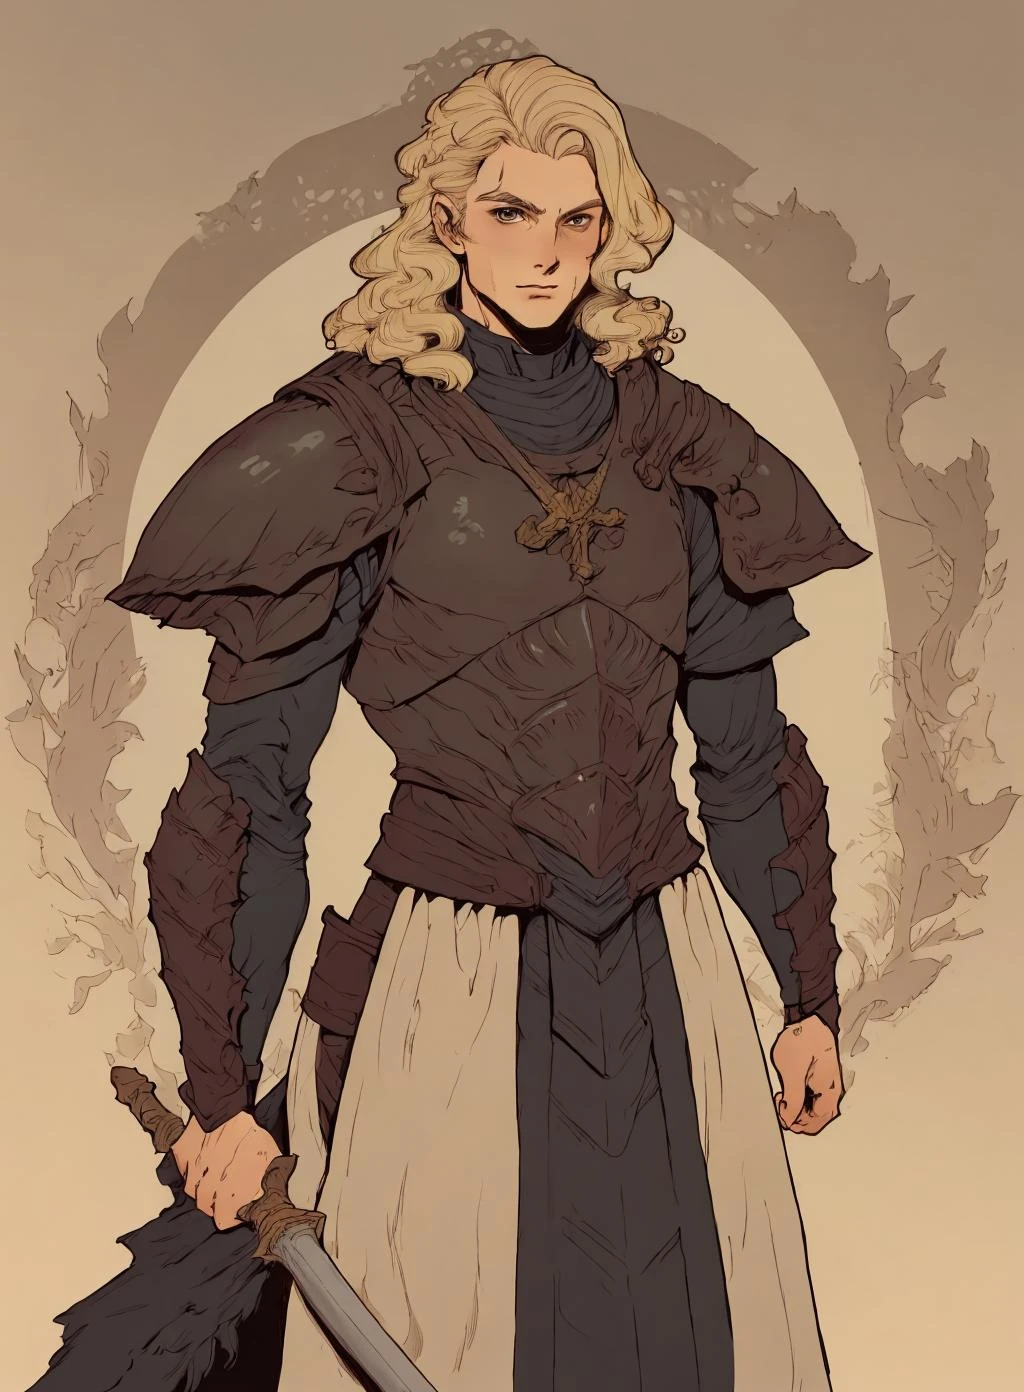 draw of a man,
blonde hair,   armor, medieval warrior,  solo,
